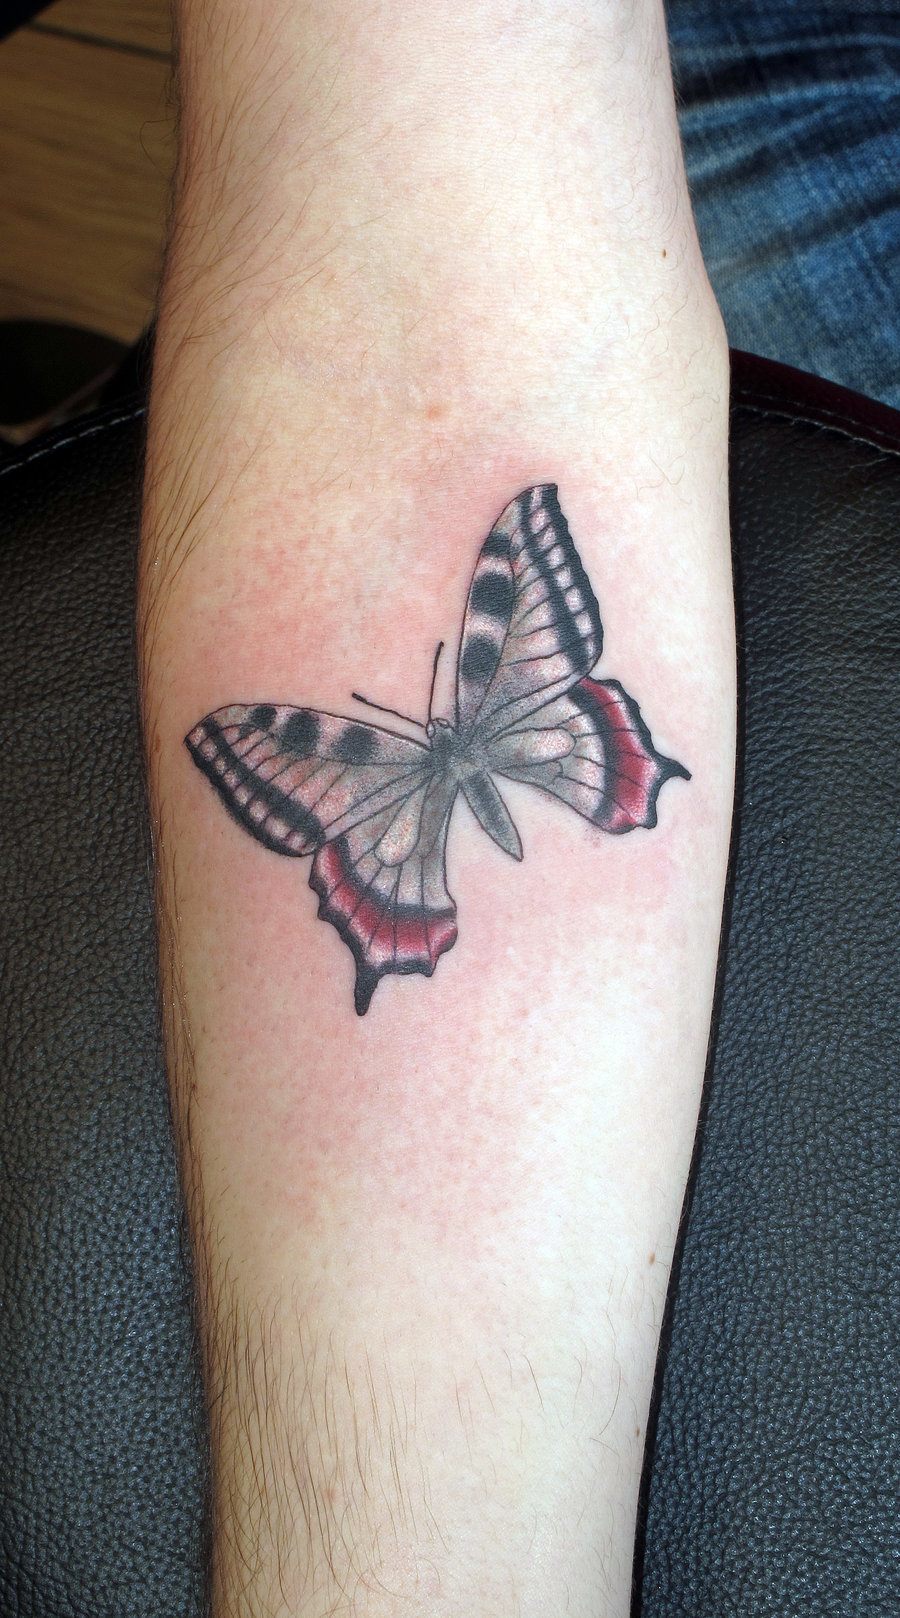 Black and red tribal butterfly tattoo on inner arm